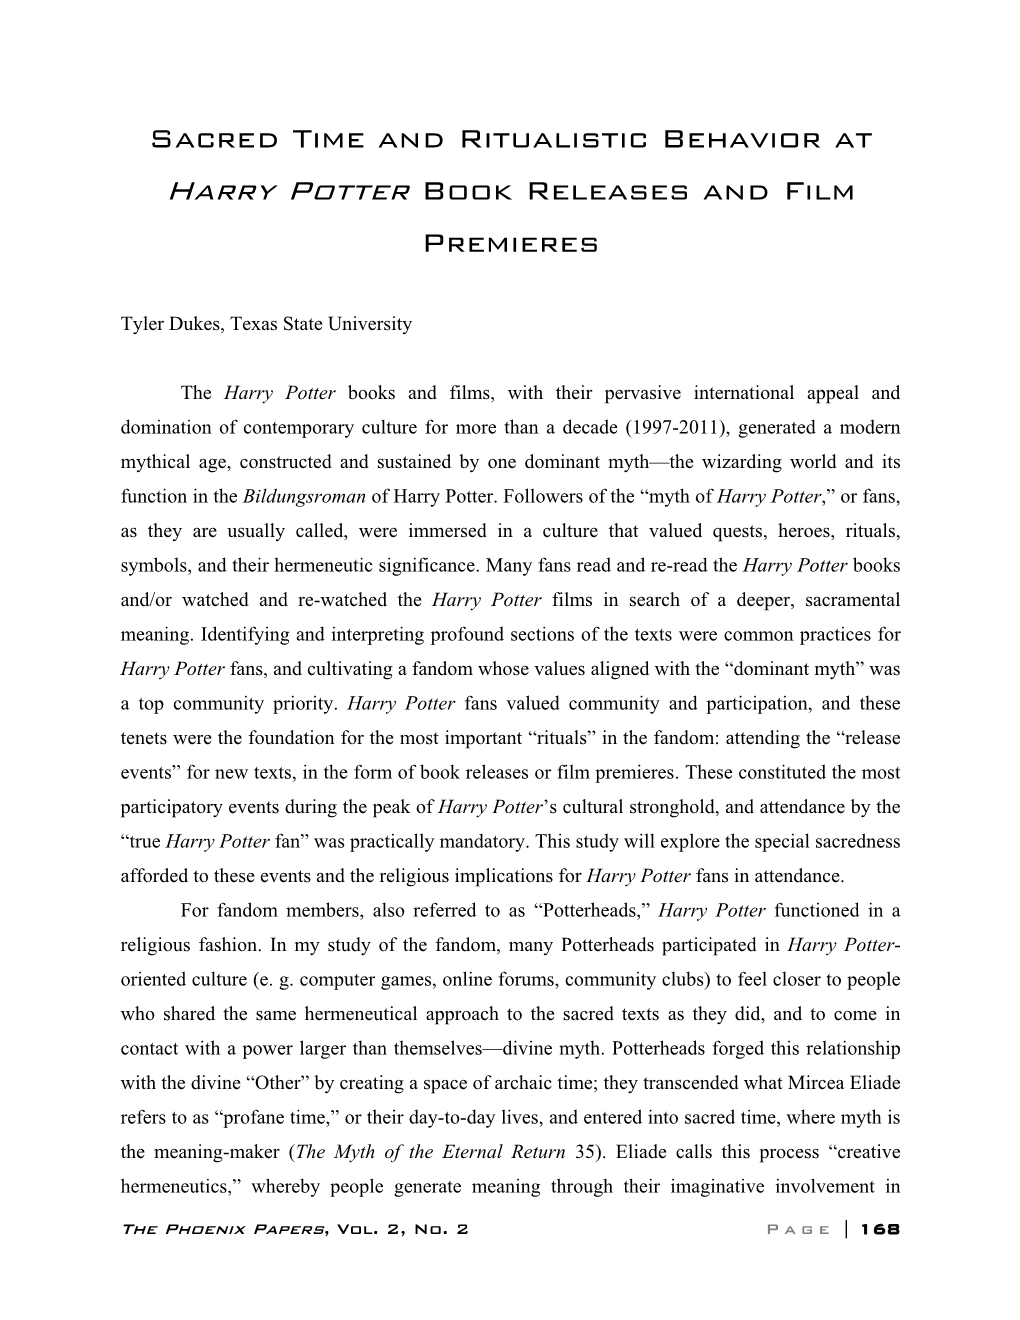 Sacred Time and Ritualistic Behavior at Harry Potter Book Releases and Film Premieres